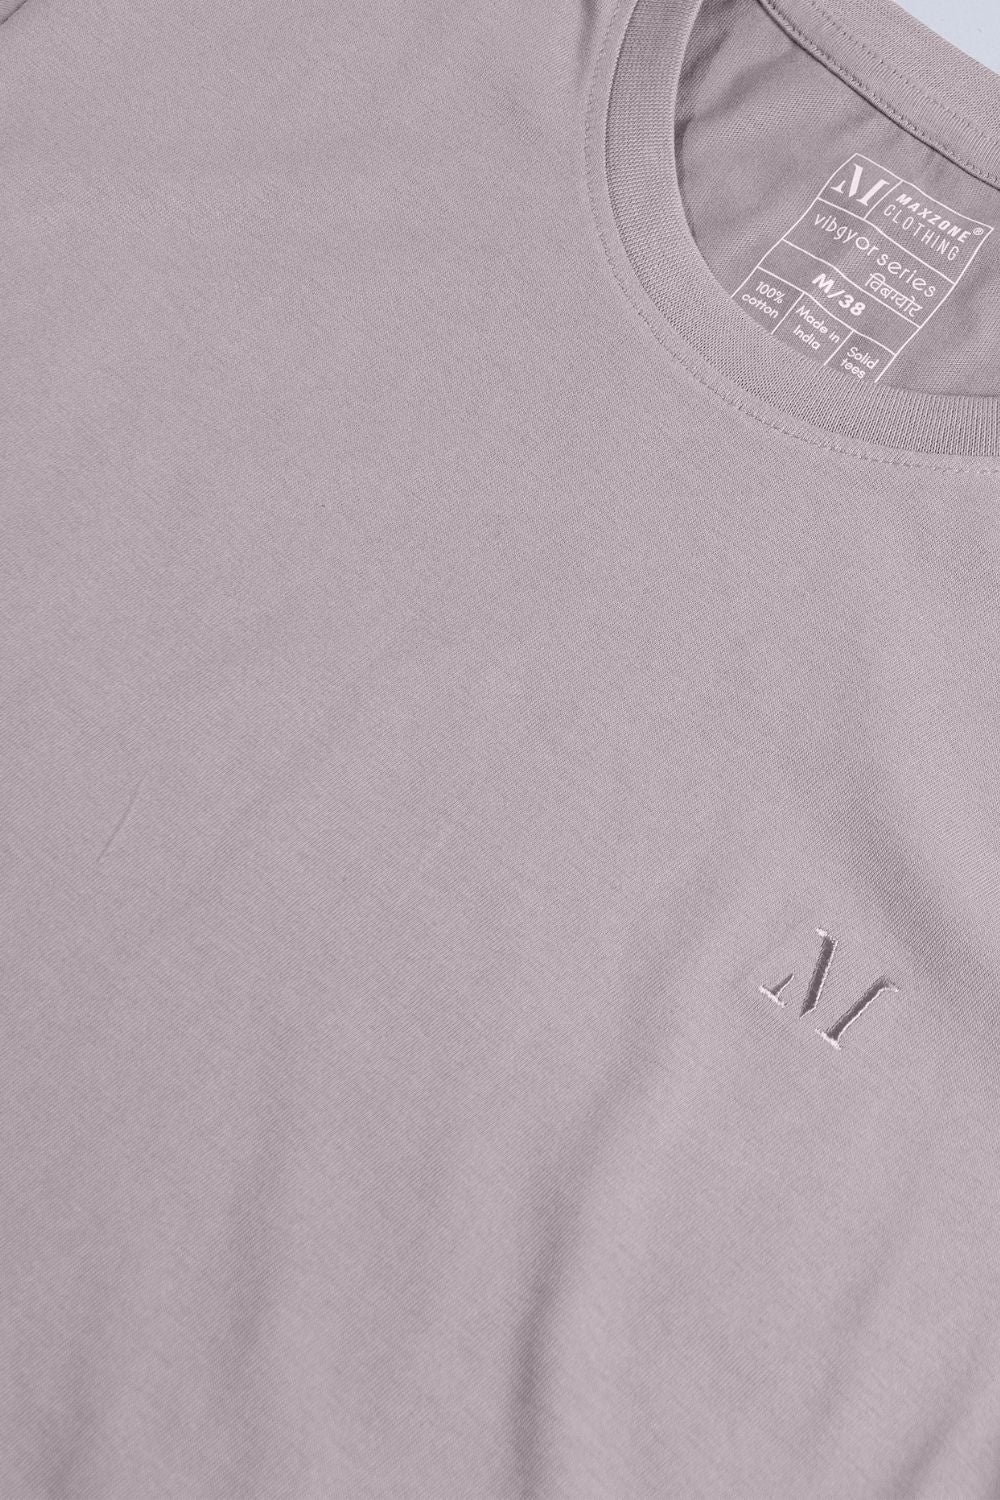 Coin grey colored, solid t shirt for men with round neck and half sleeves, closeup.